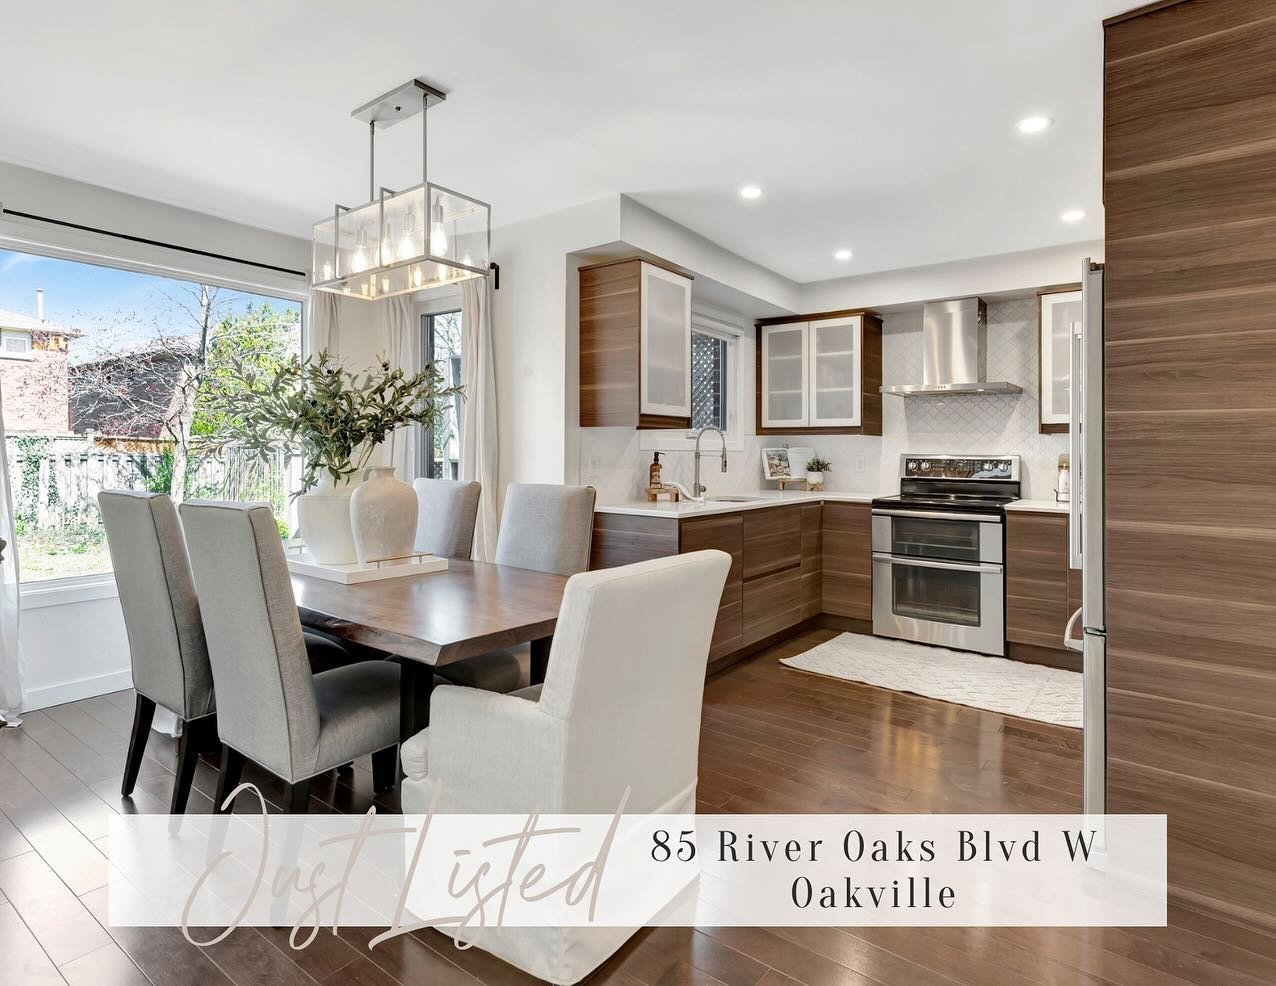 Welcome to 85 River Oaks Blvd W! Extensively renovated in 2019, this 4 bedroom detached home is completely move in ready!

Located within walking distance to some of Oakville&rsquo;s top-rated public and private schools, parks and walking trails, thi